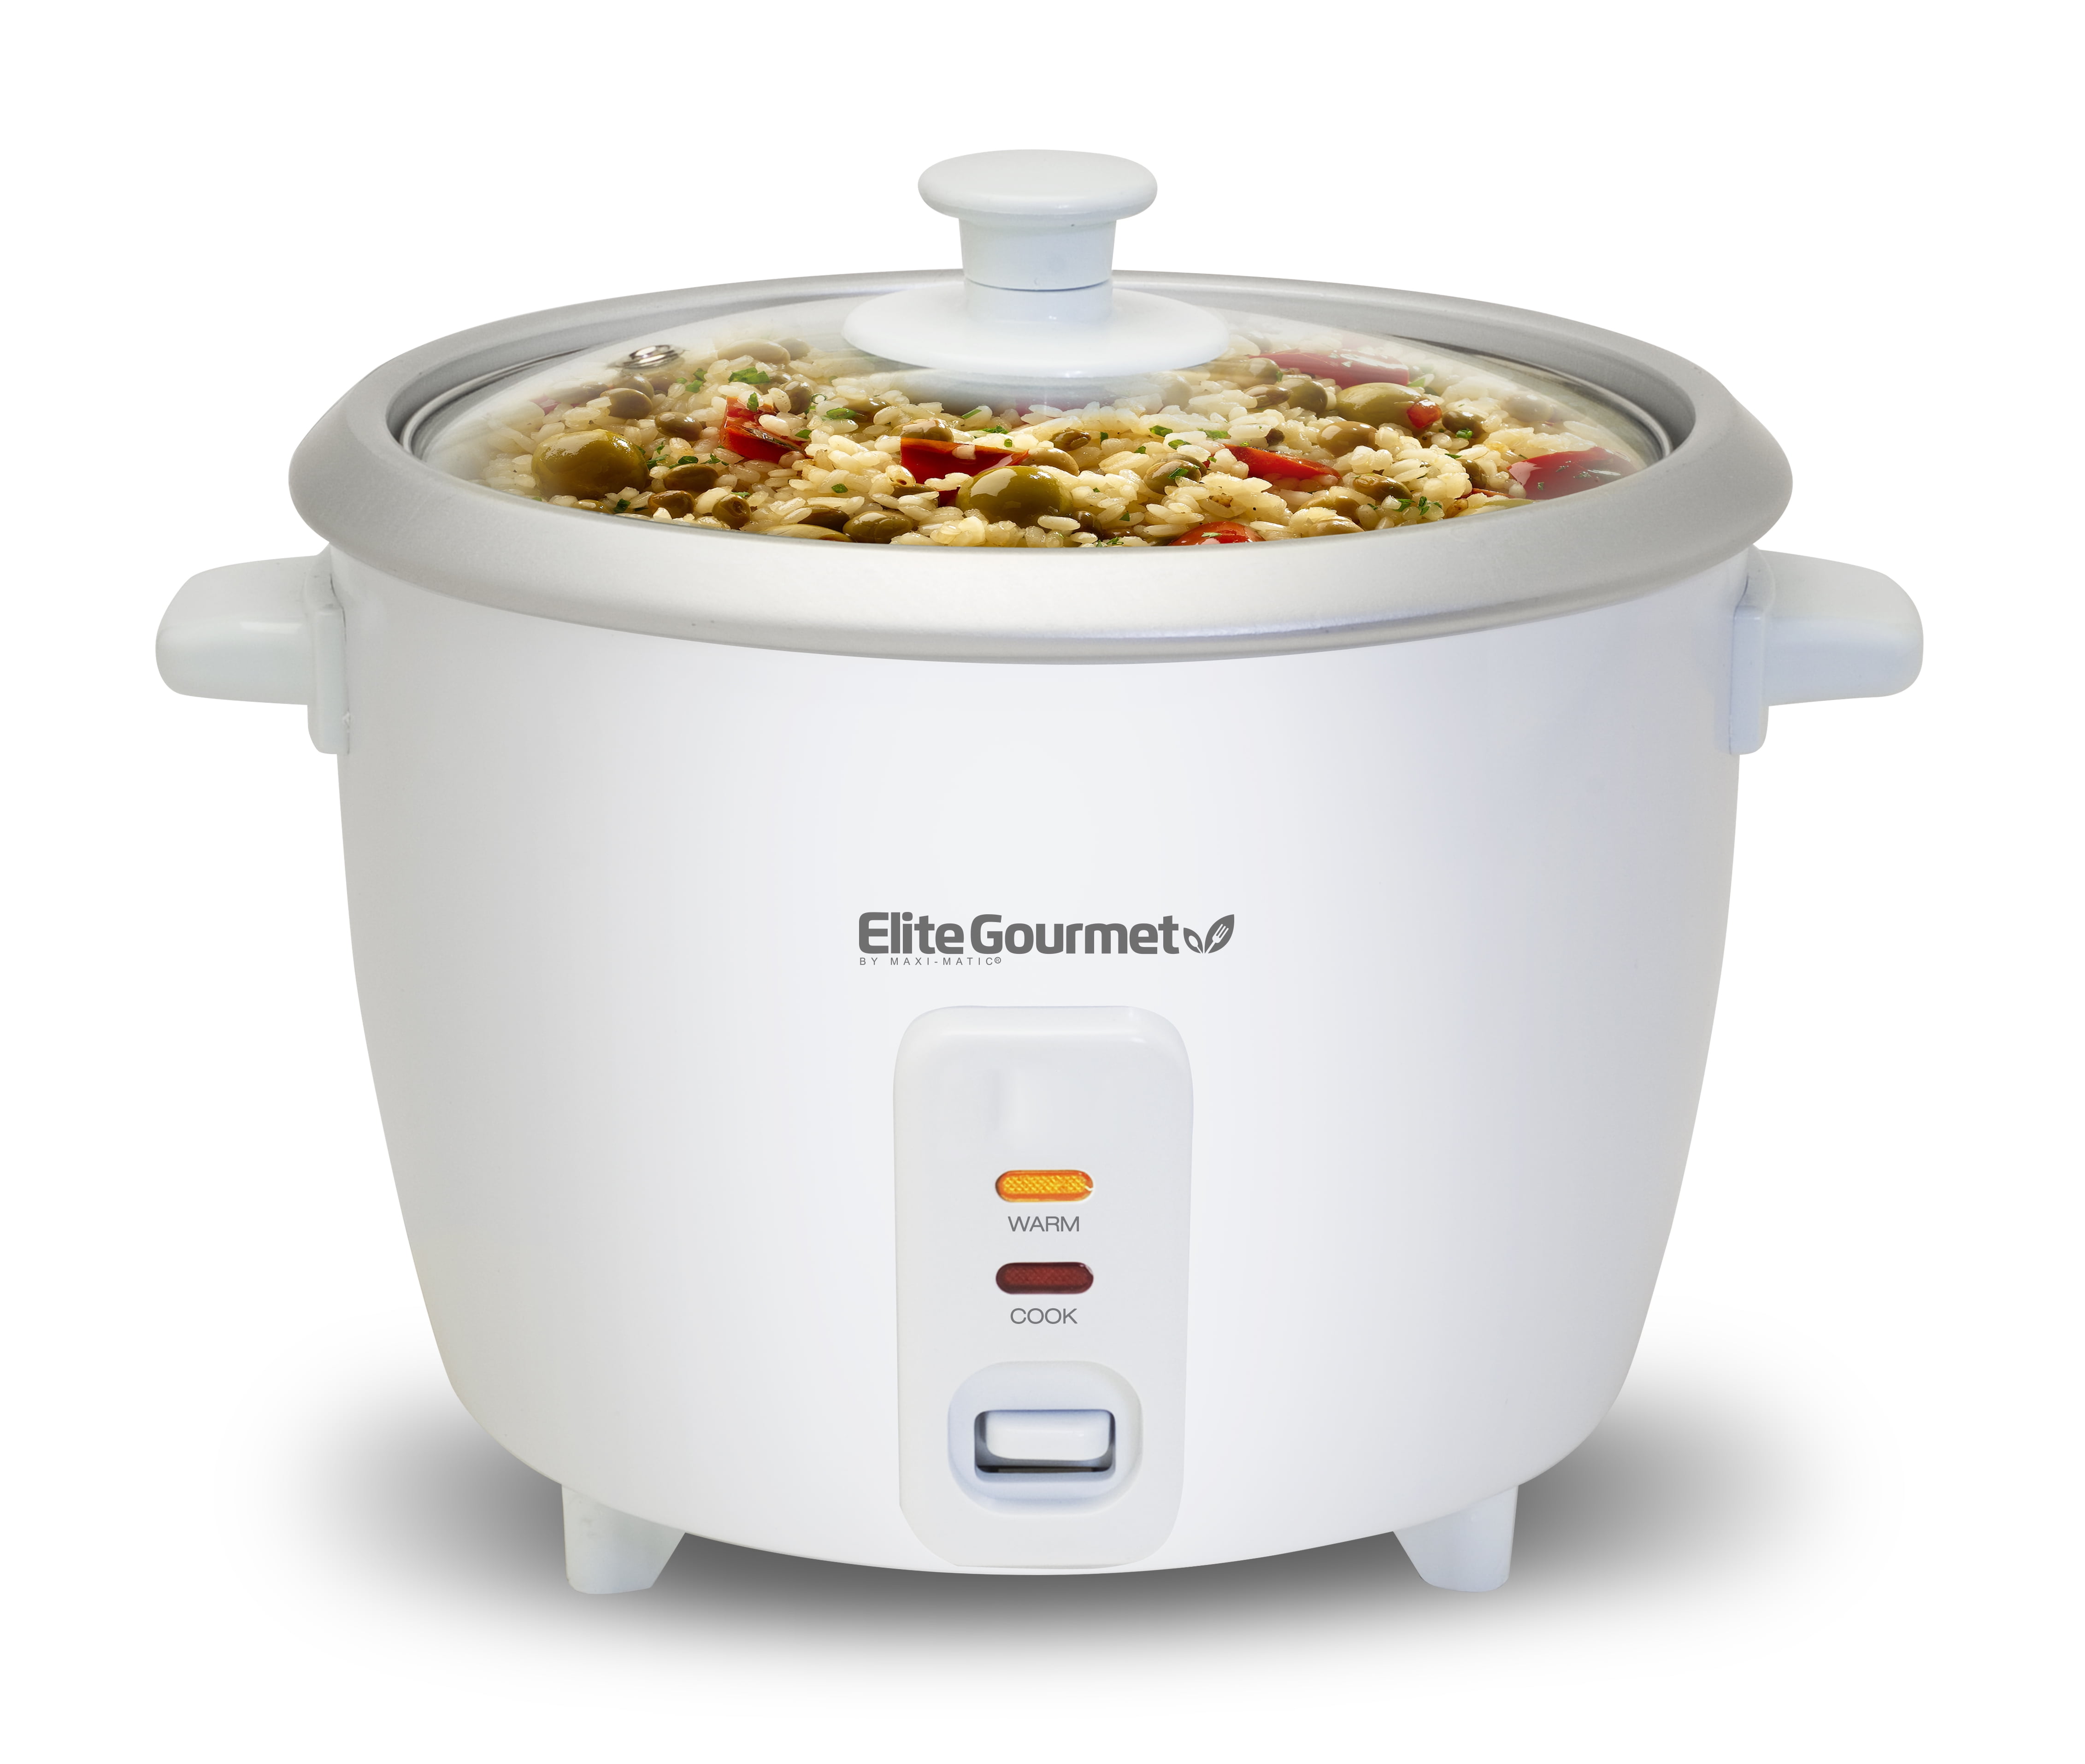 COOK WITH COLOR 6 Cup Rice Cooker 300W - Effortless Cooking and Perfectly,  Cooks 3 Cups of Raw Rice for 6 Cups of Cooked Rice, Grey